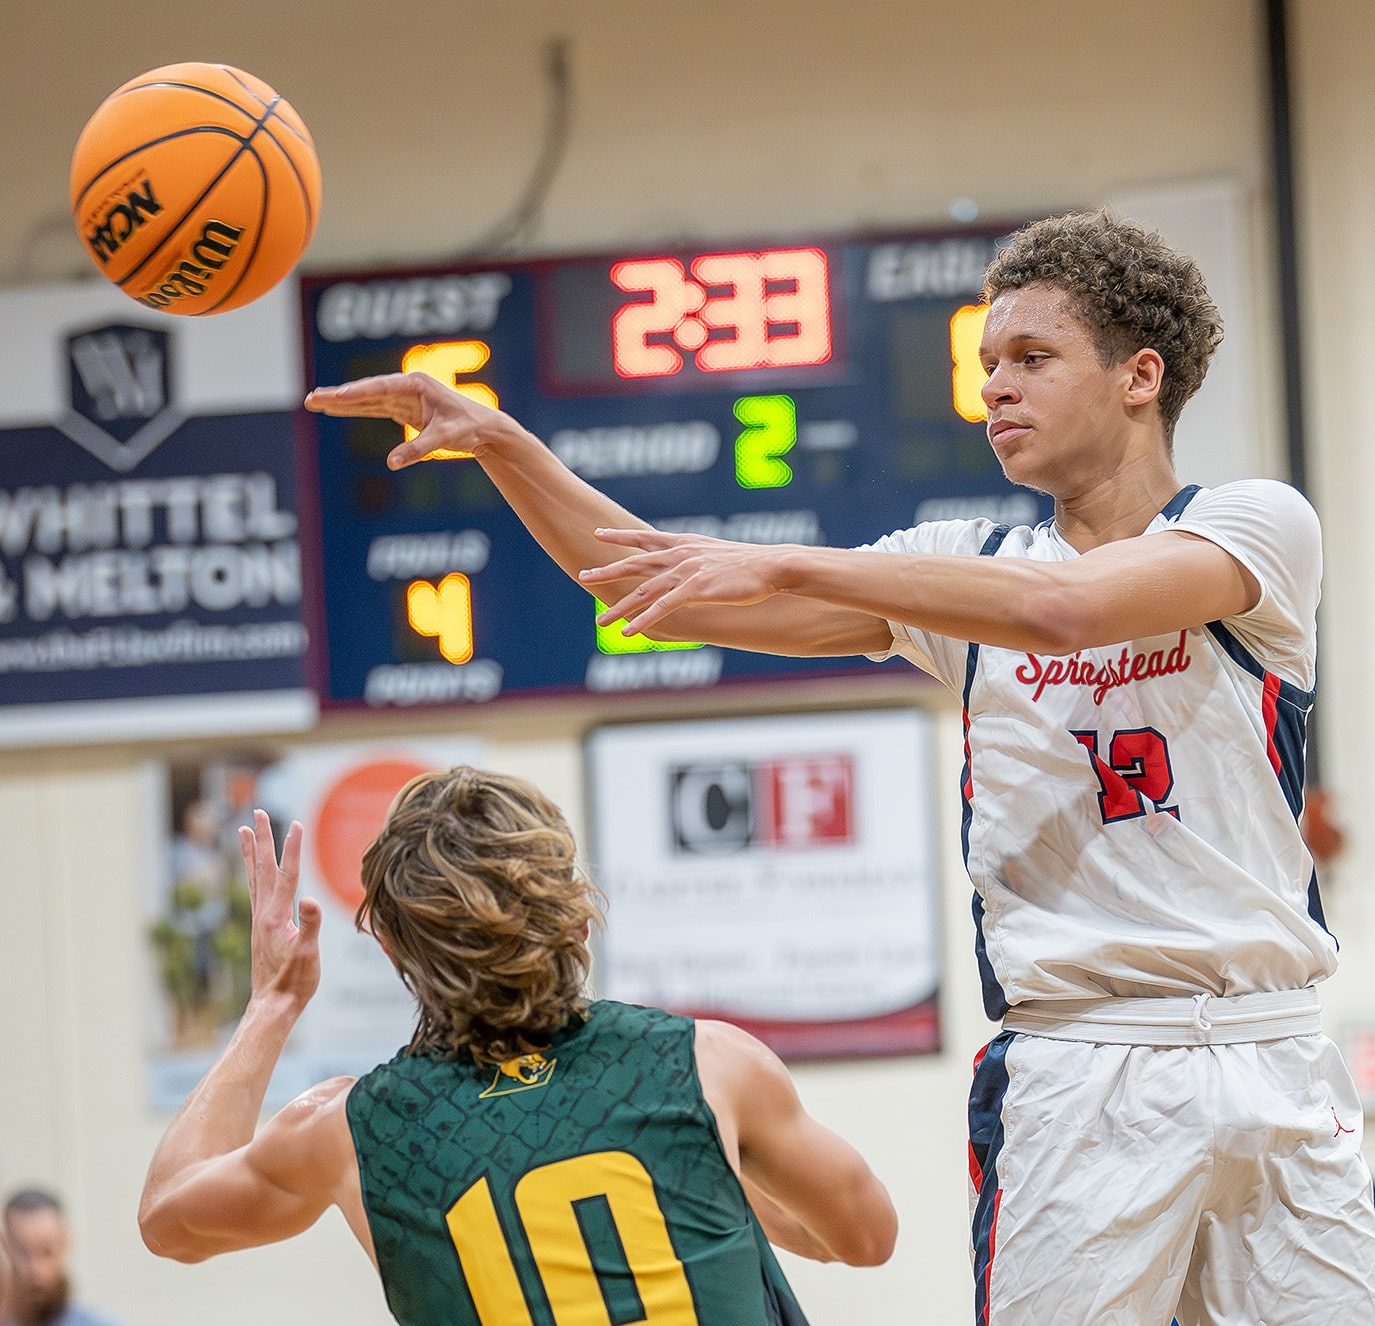 Springstead High's ,12, Austin Nicholson dishes a pass during Tuesday night’s match against visiting Lecanto High. Photo by Joe DiCristofalo